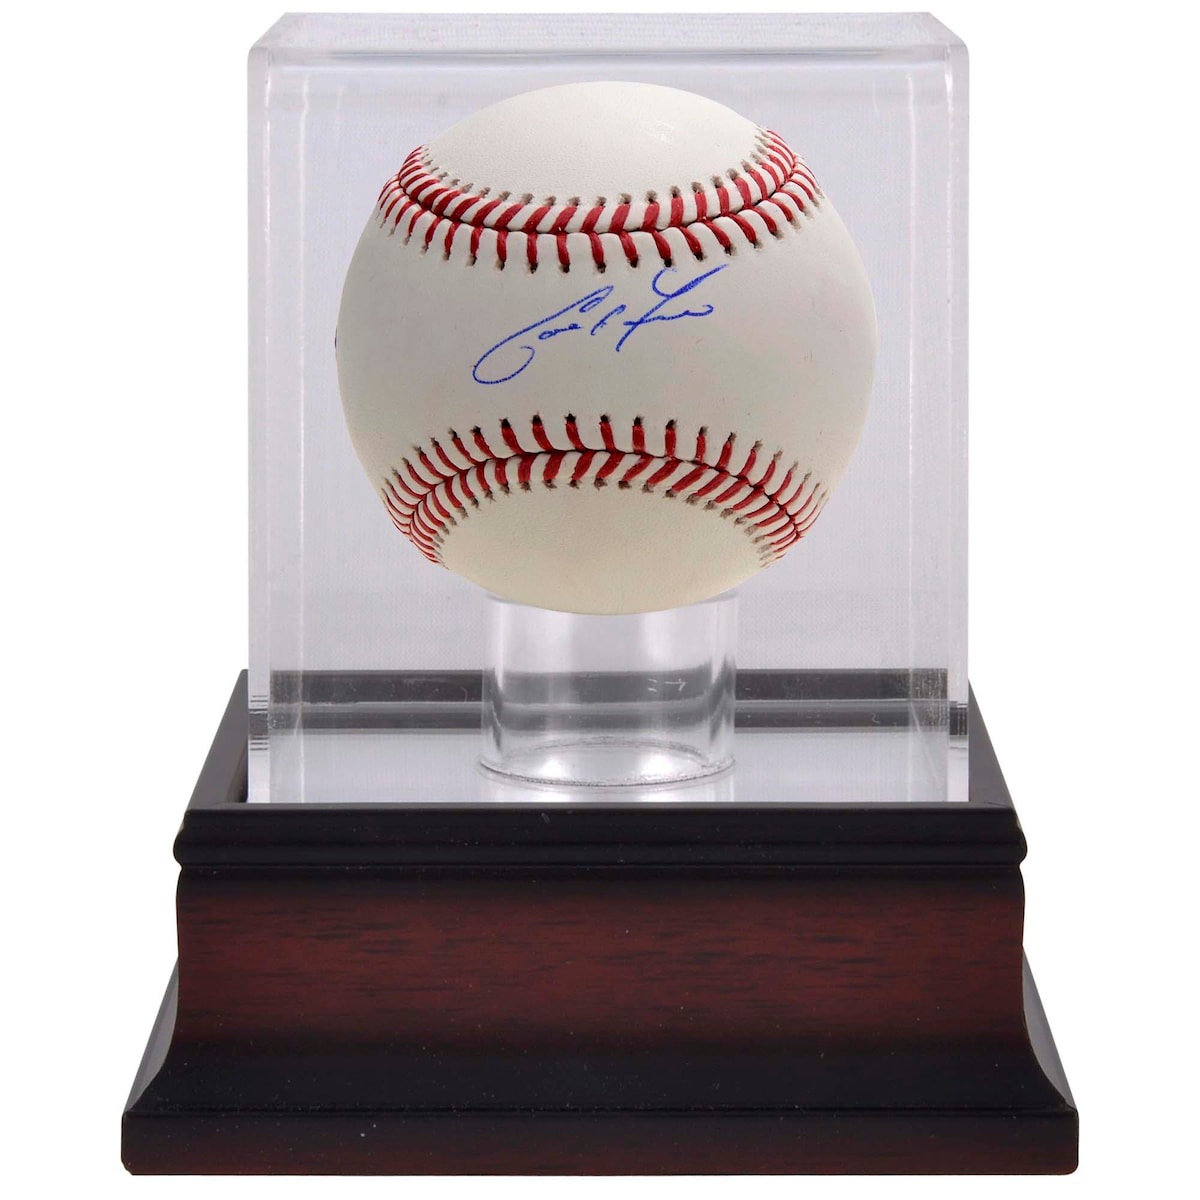 Autographed by Christian Yelich, this Baseball & Mahogany Baseball Display Case is ready to boost your Milwaukee Brewers...